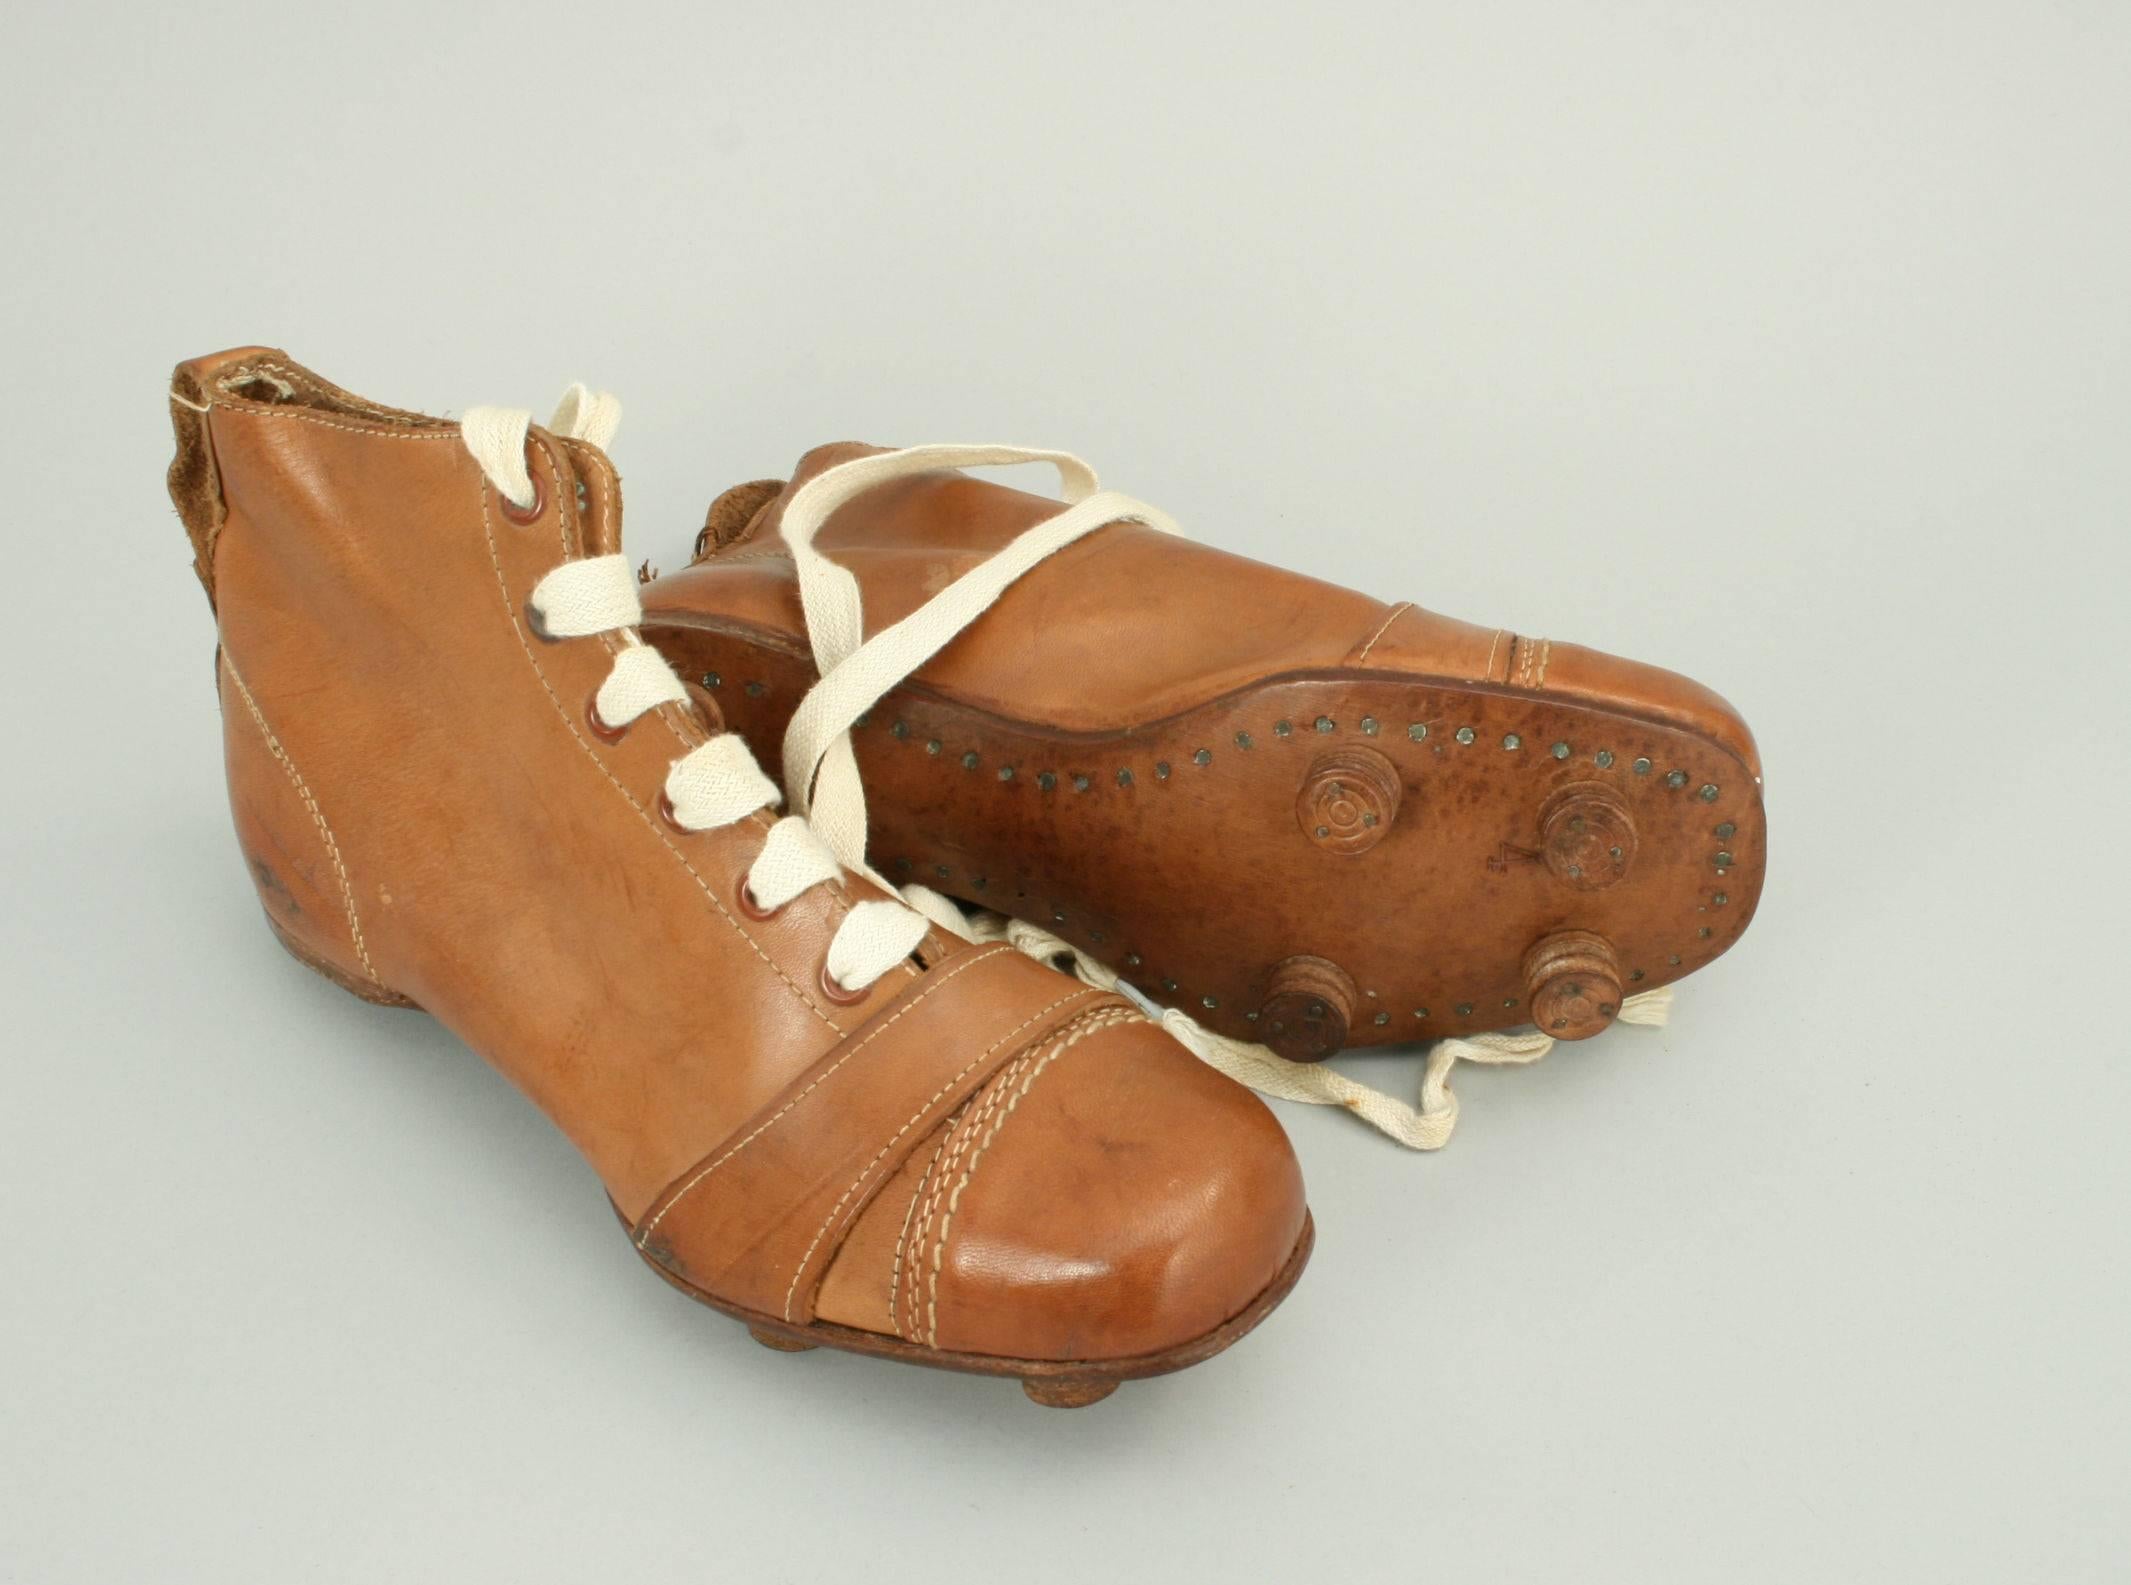 Vintage pair of leather football, rugby boots.
A pair of unused tan leather boots in exceptional condition. The toe area on the boots are made of hardened leather, as it was the normal play to toe-kick the football rather than use the instep as in